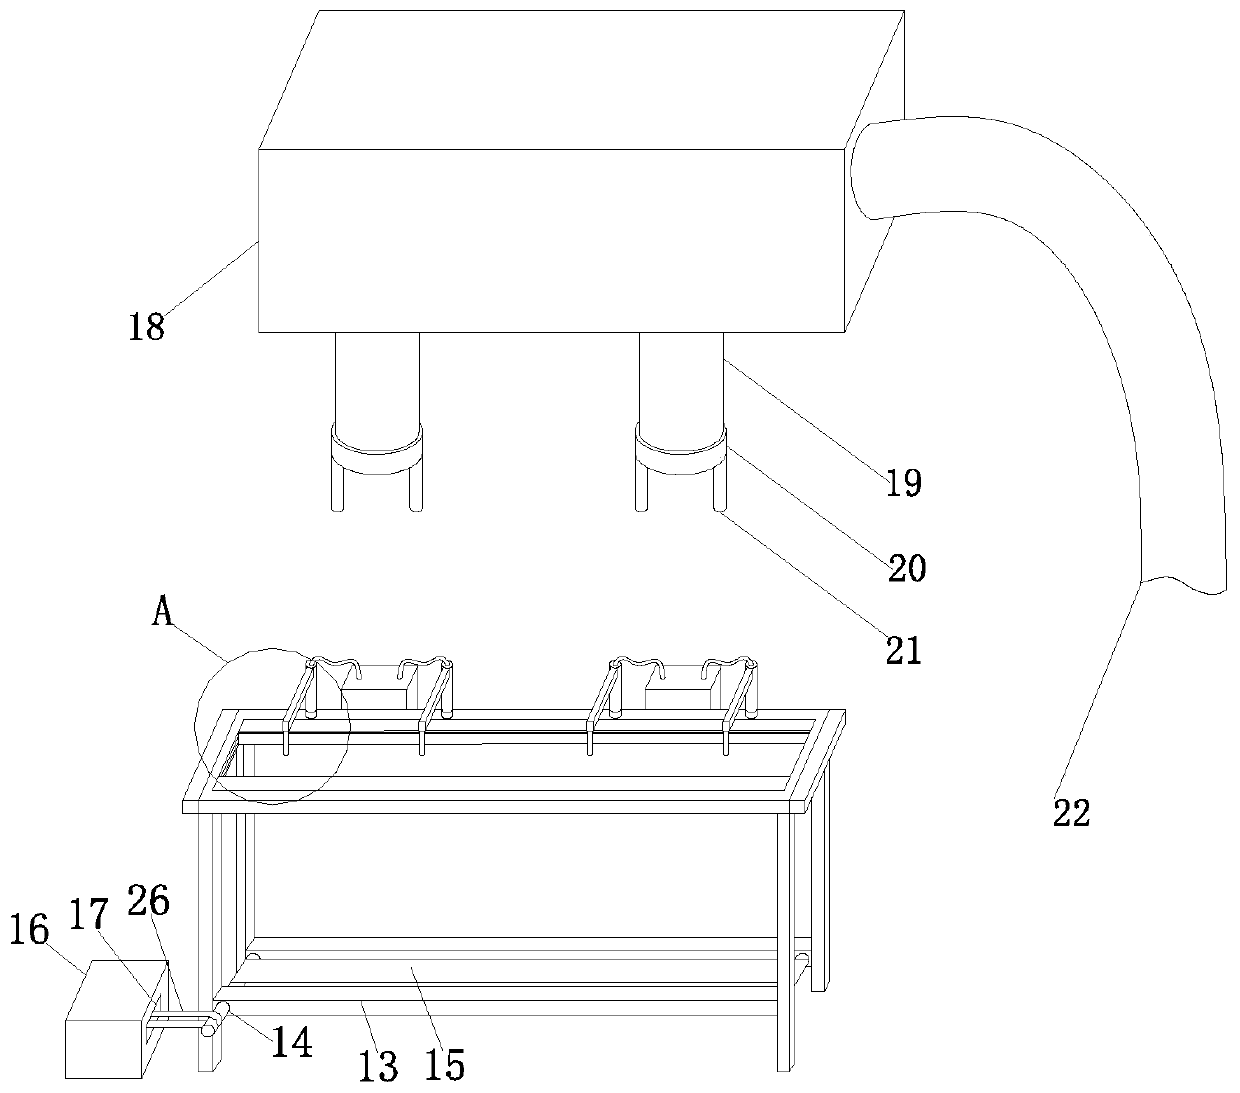 Product packaging material pressing device facilitating material taking